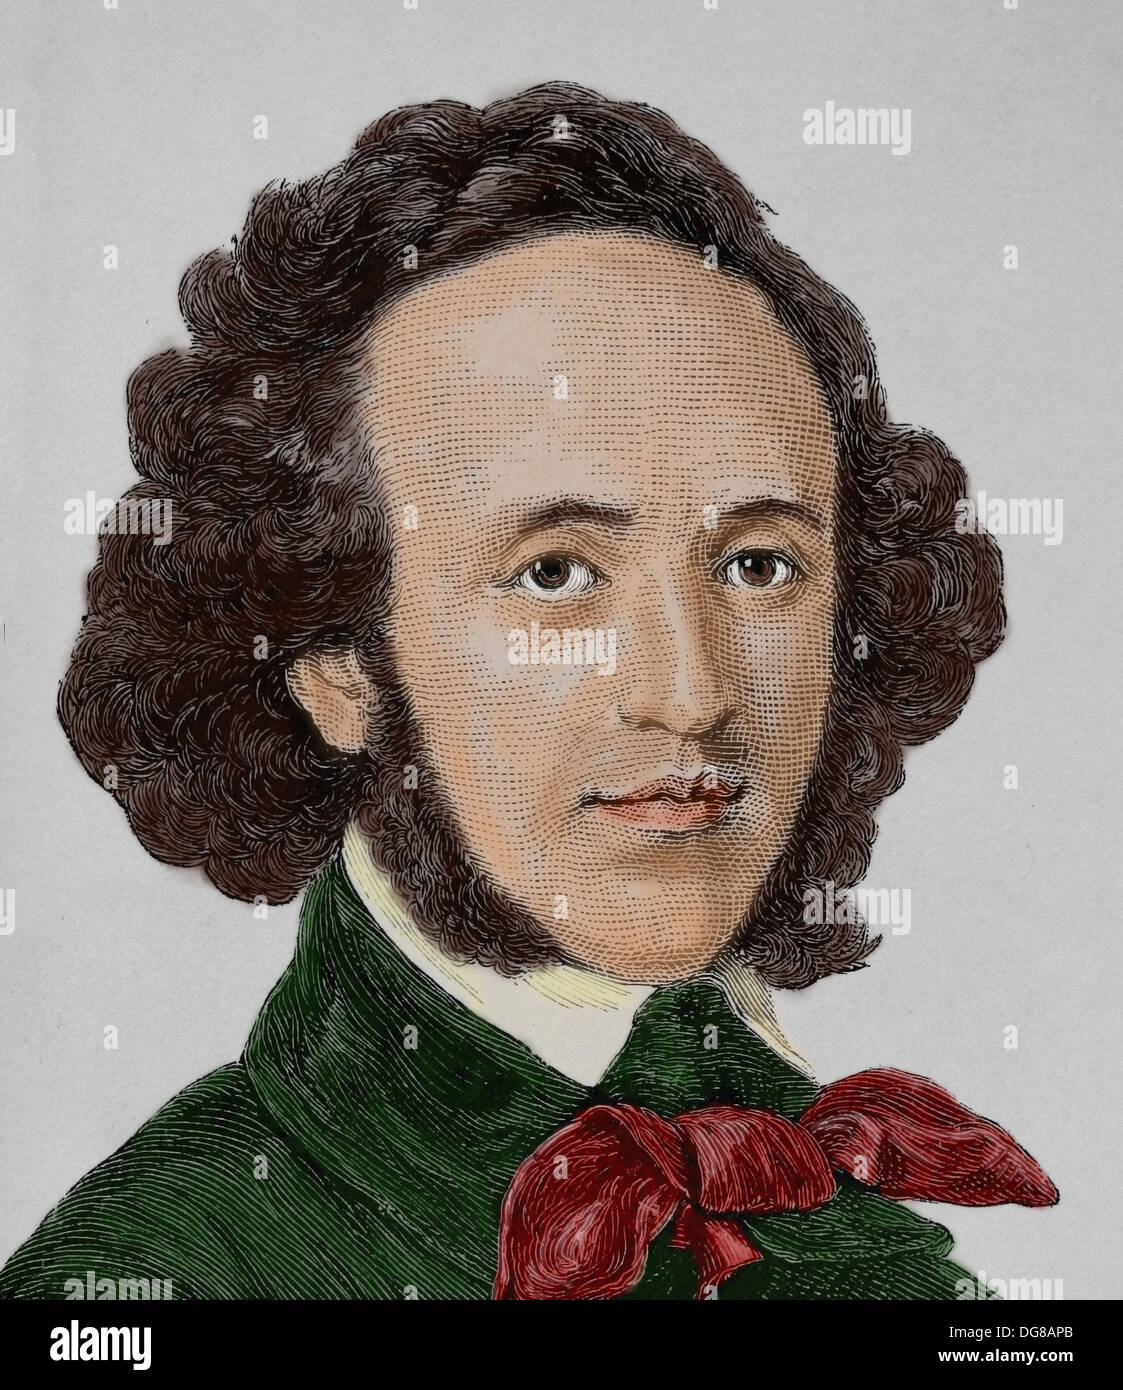 Felix Mendelssohn (1809 – 1847). German composer, pianist, organist and conductor of the early Romantic period. Engraving. Stock Photo